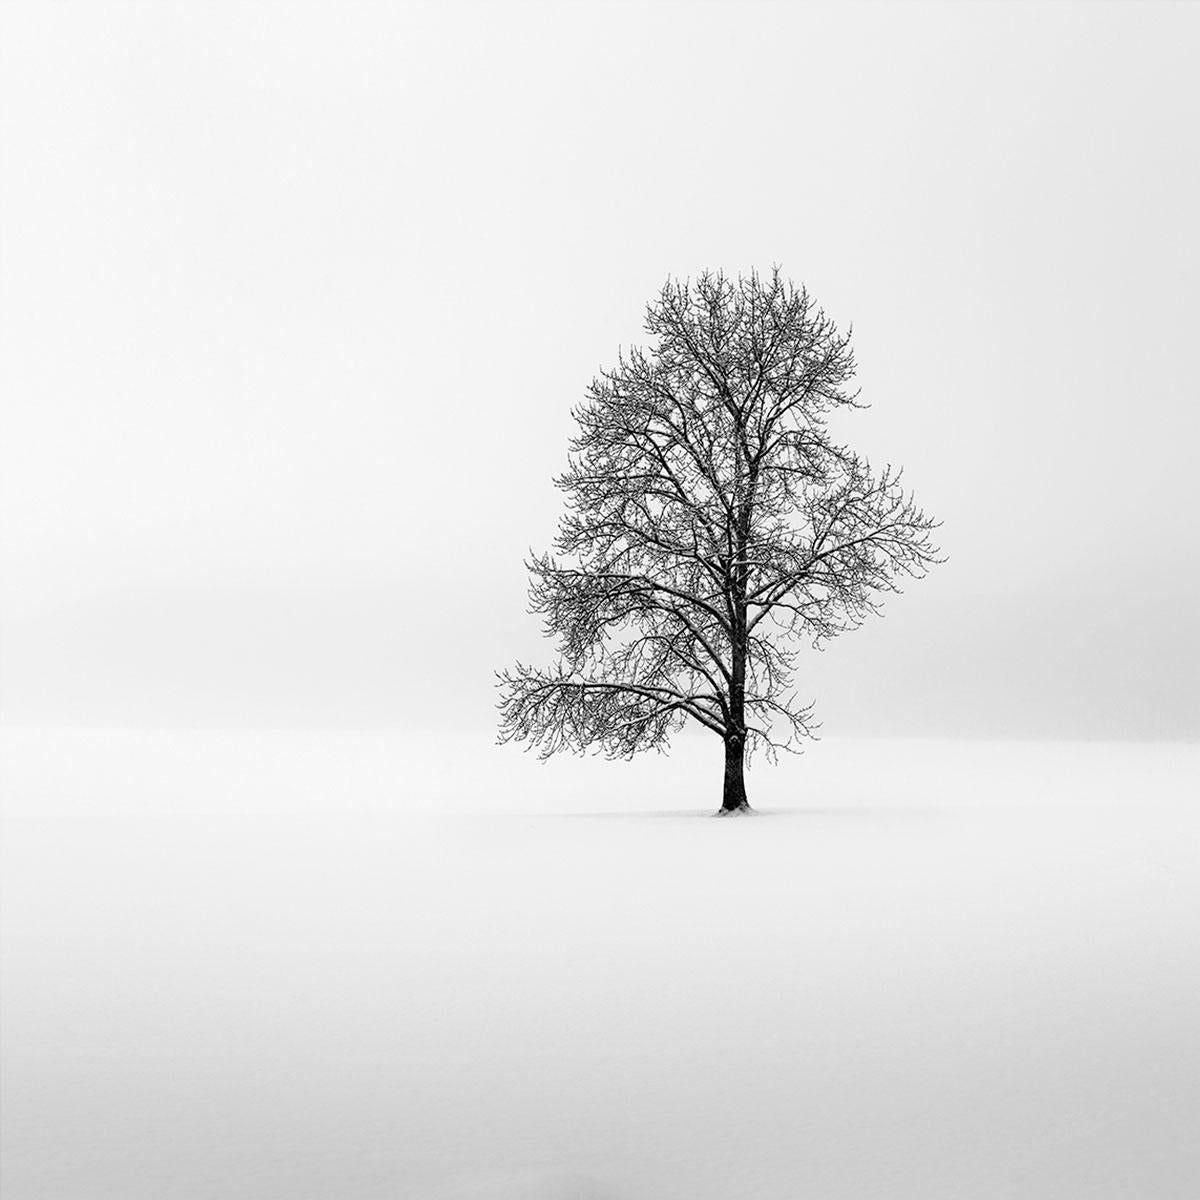 Eternal - King of trees by Alexandre Manuel (Black and white minimalist) For Sale 1